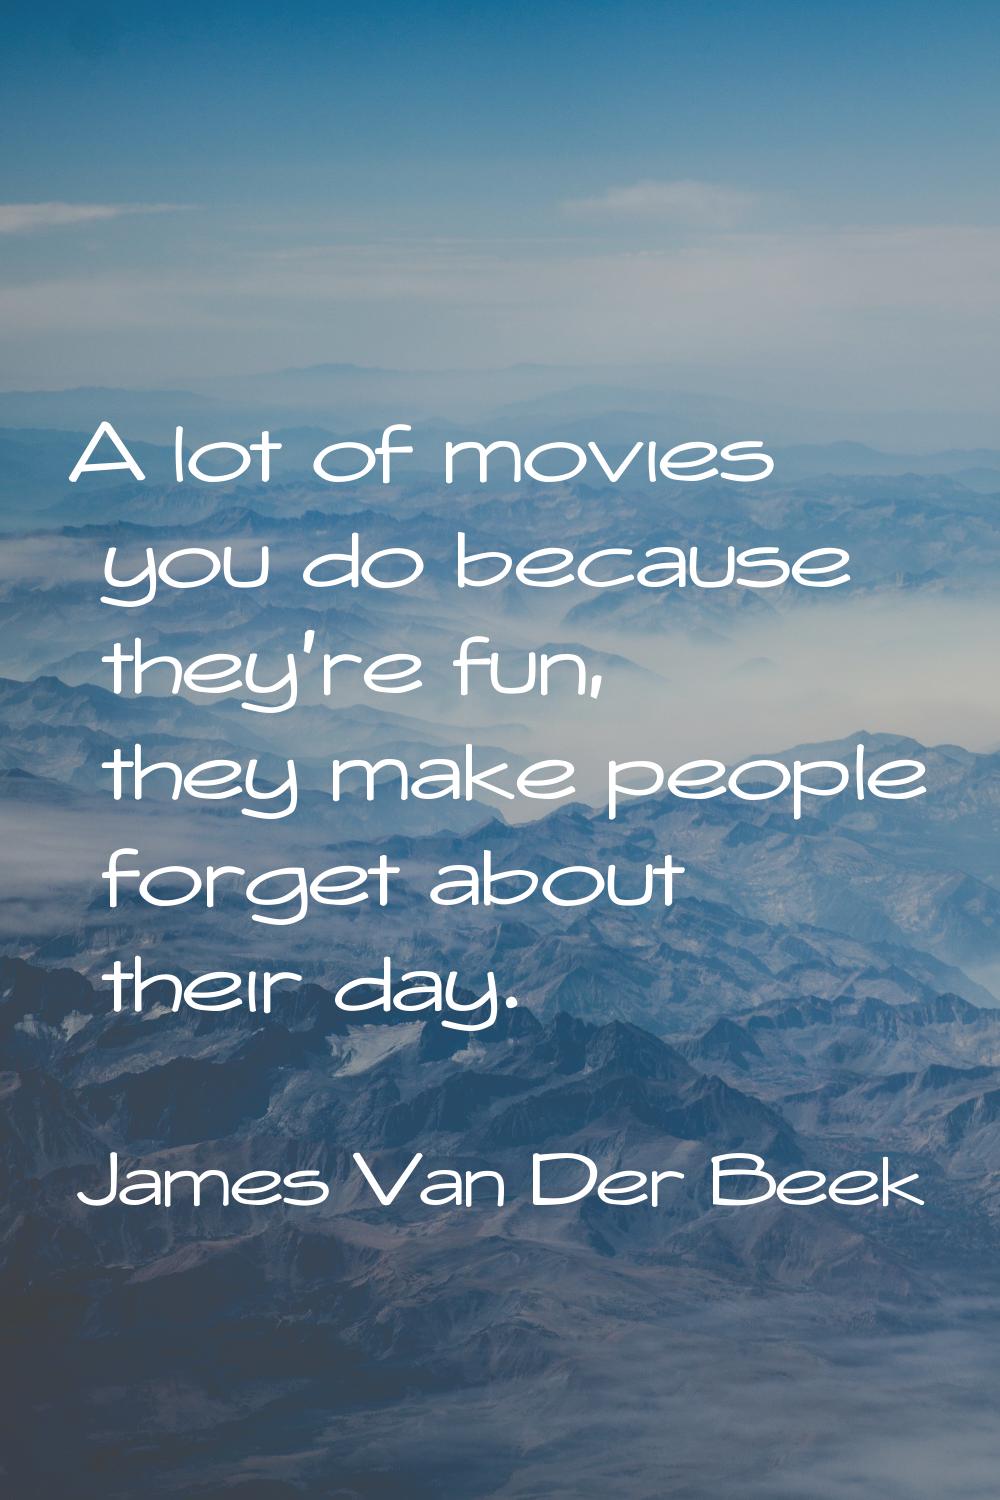 A lot of movies you do because they're fun, they make people forget about their day.